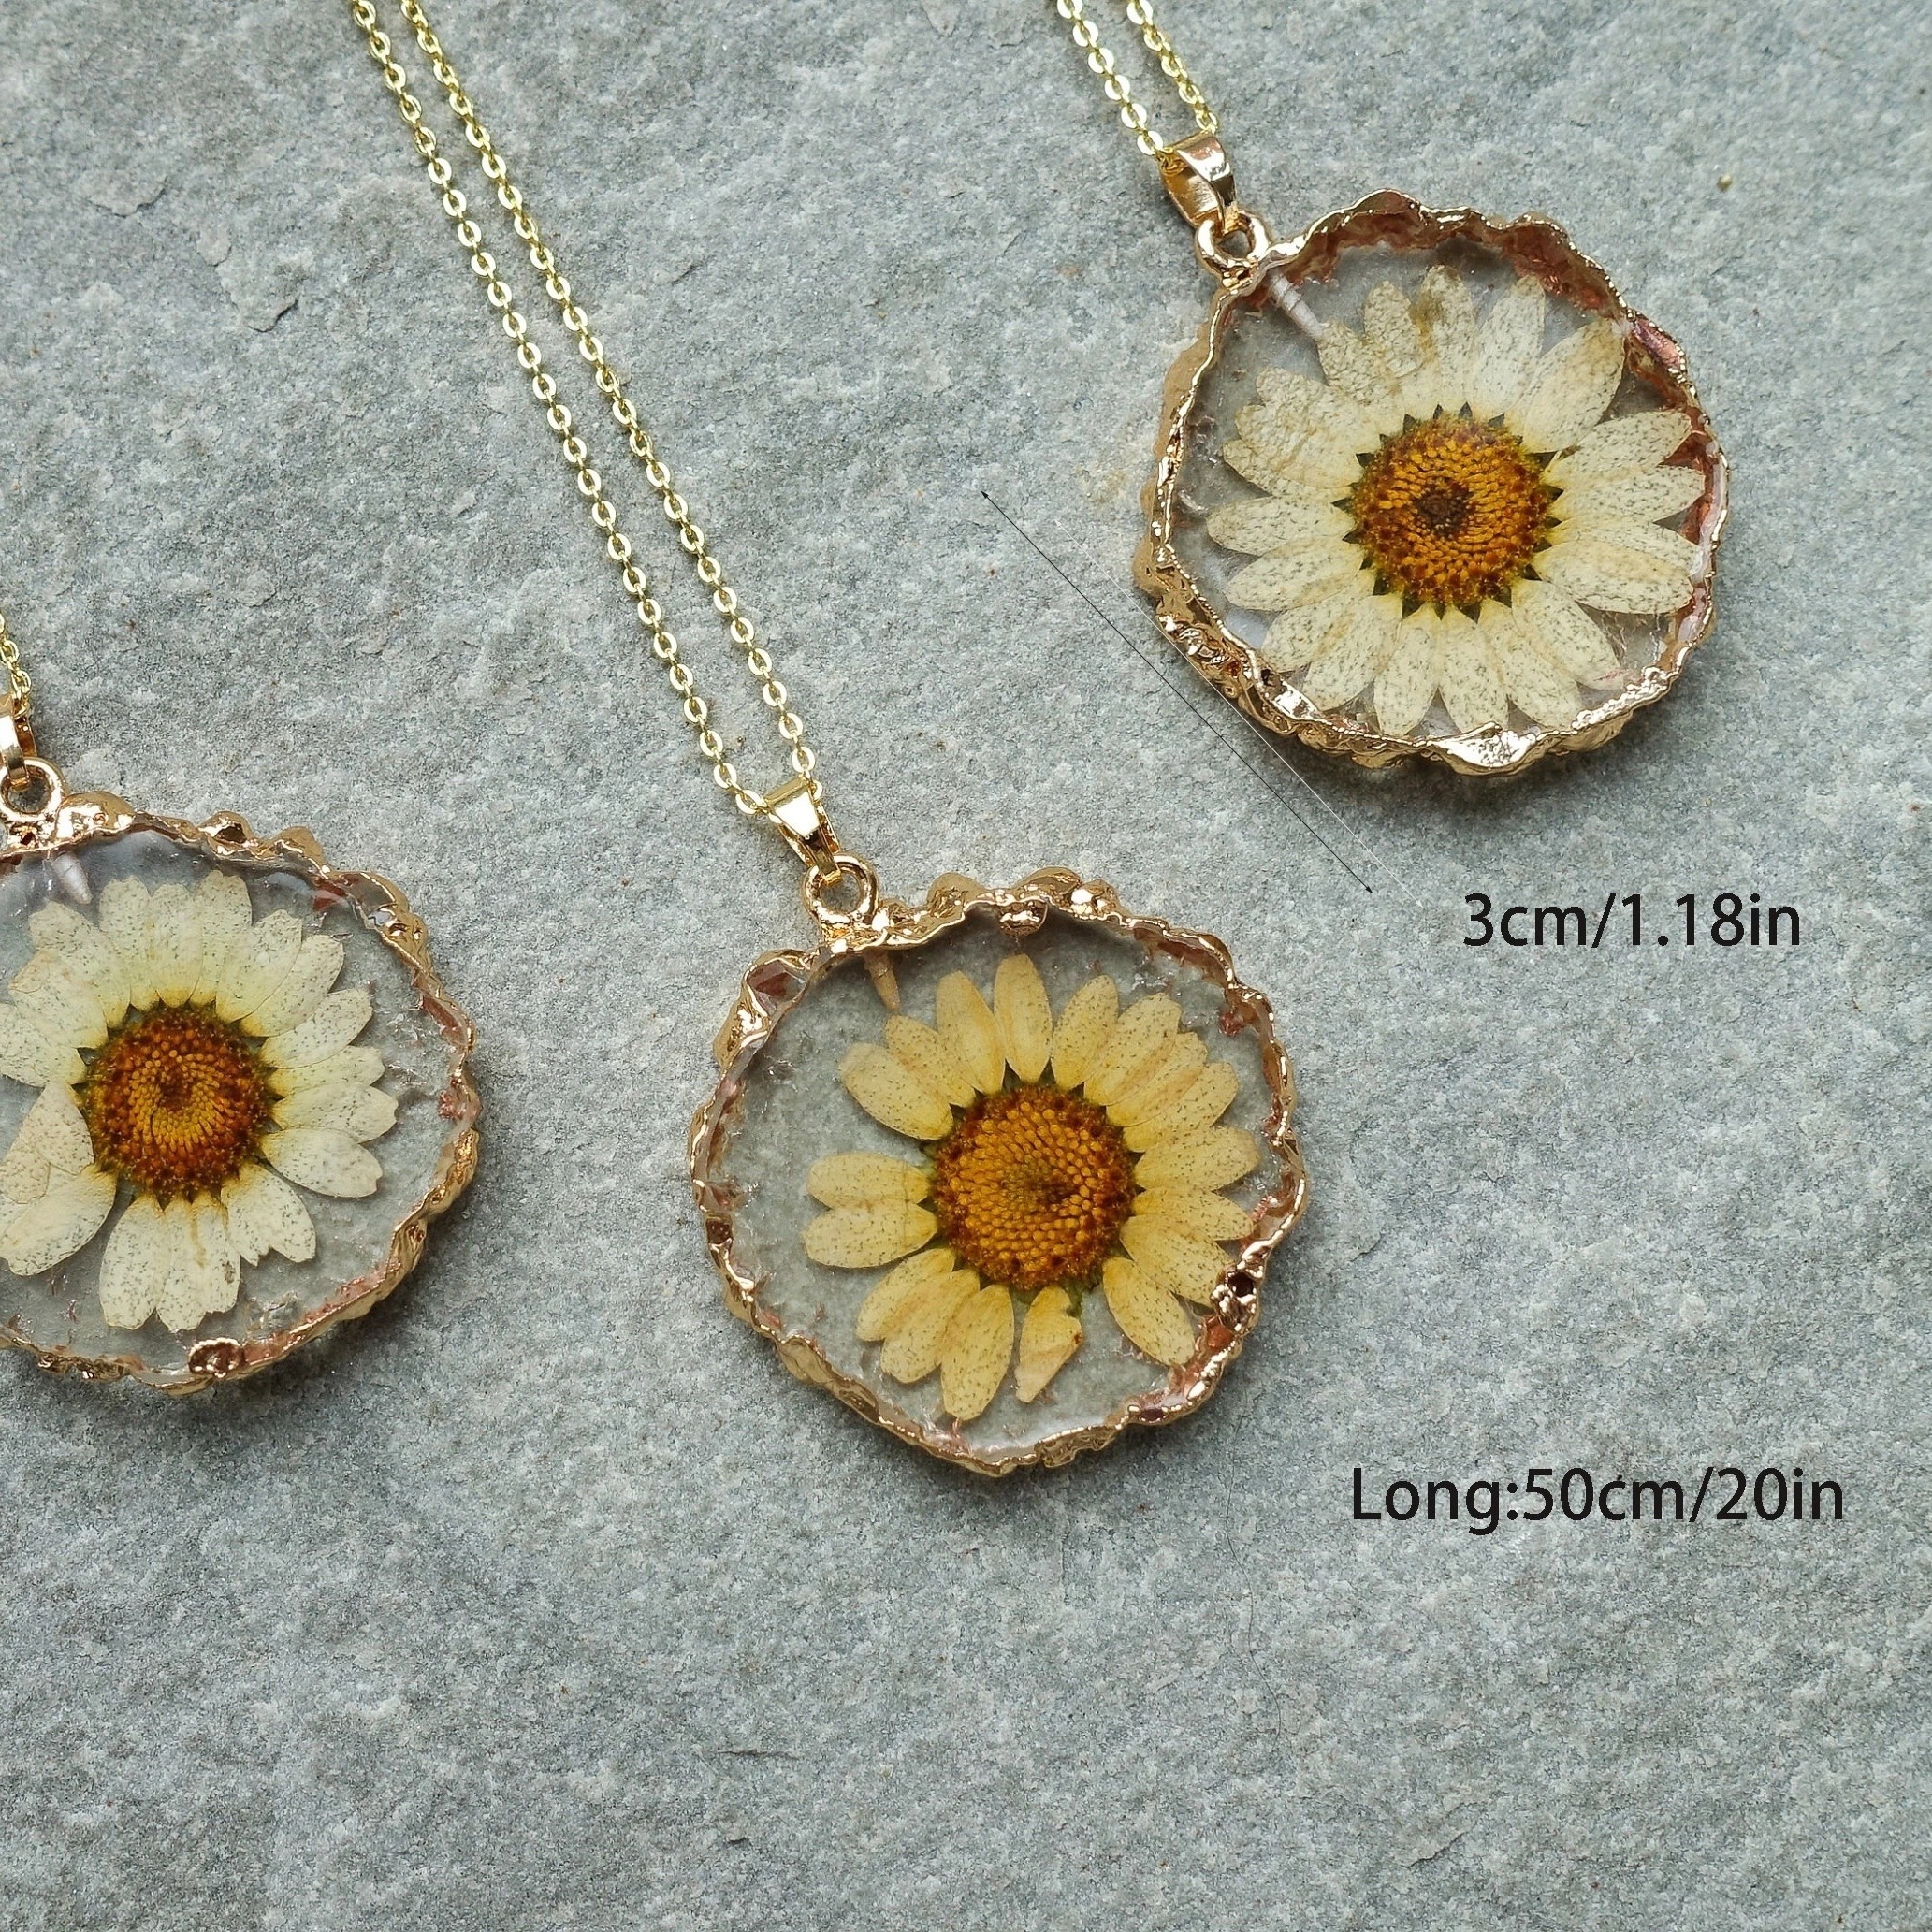 NEW Gold Daisy Flower Necklace Pendant Chain For Women Girls